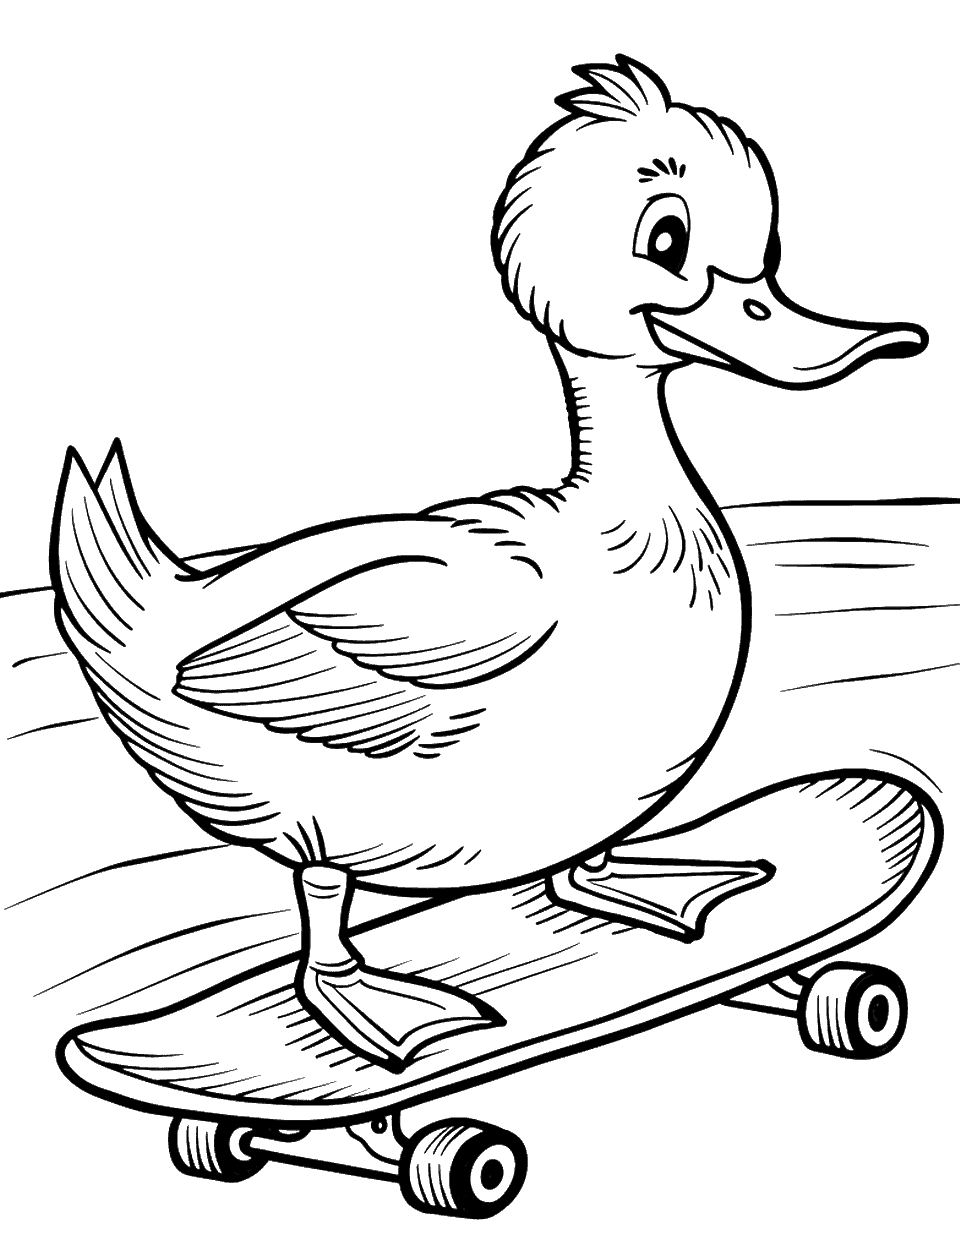 Duck on a Skateboard Coloring Page - A cool duck skateboarding down a hill, showing off its skills.